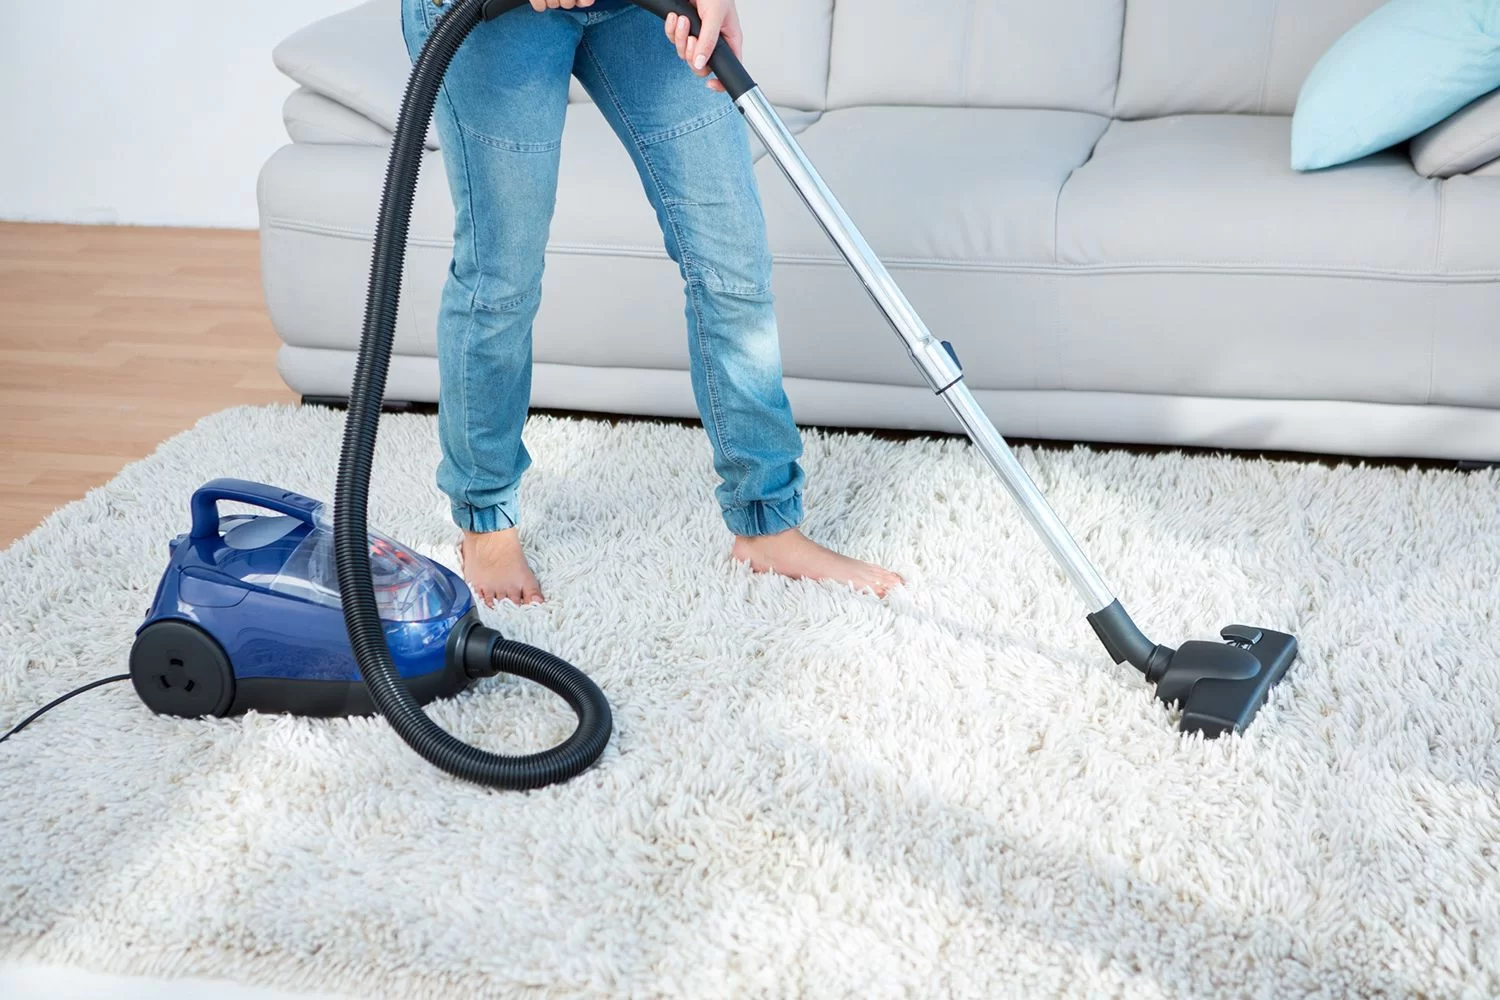 The Benefits of Hiring a Carpet Cleaning Company for End of Lease Cleaning